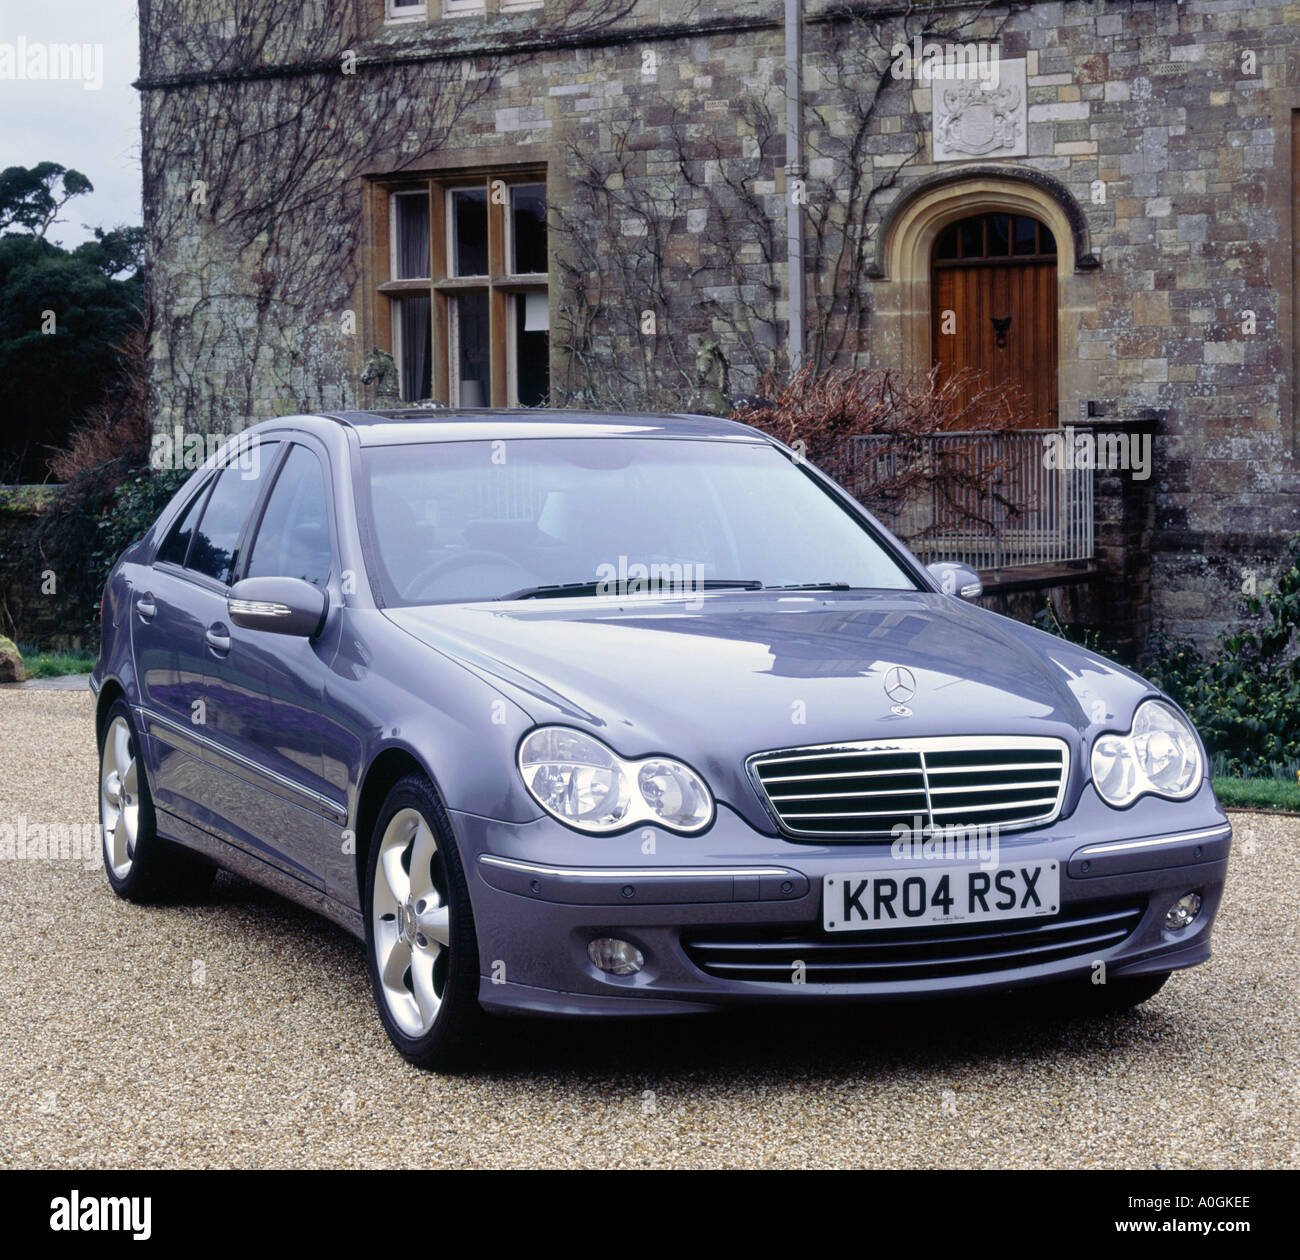 Mercedes Benz Kompressor High Resolution Stock Photography and Images -  Alamy